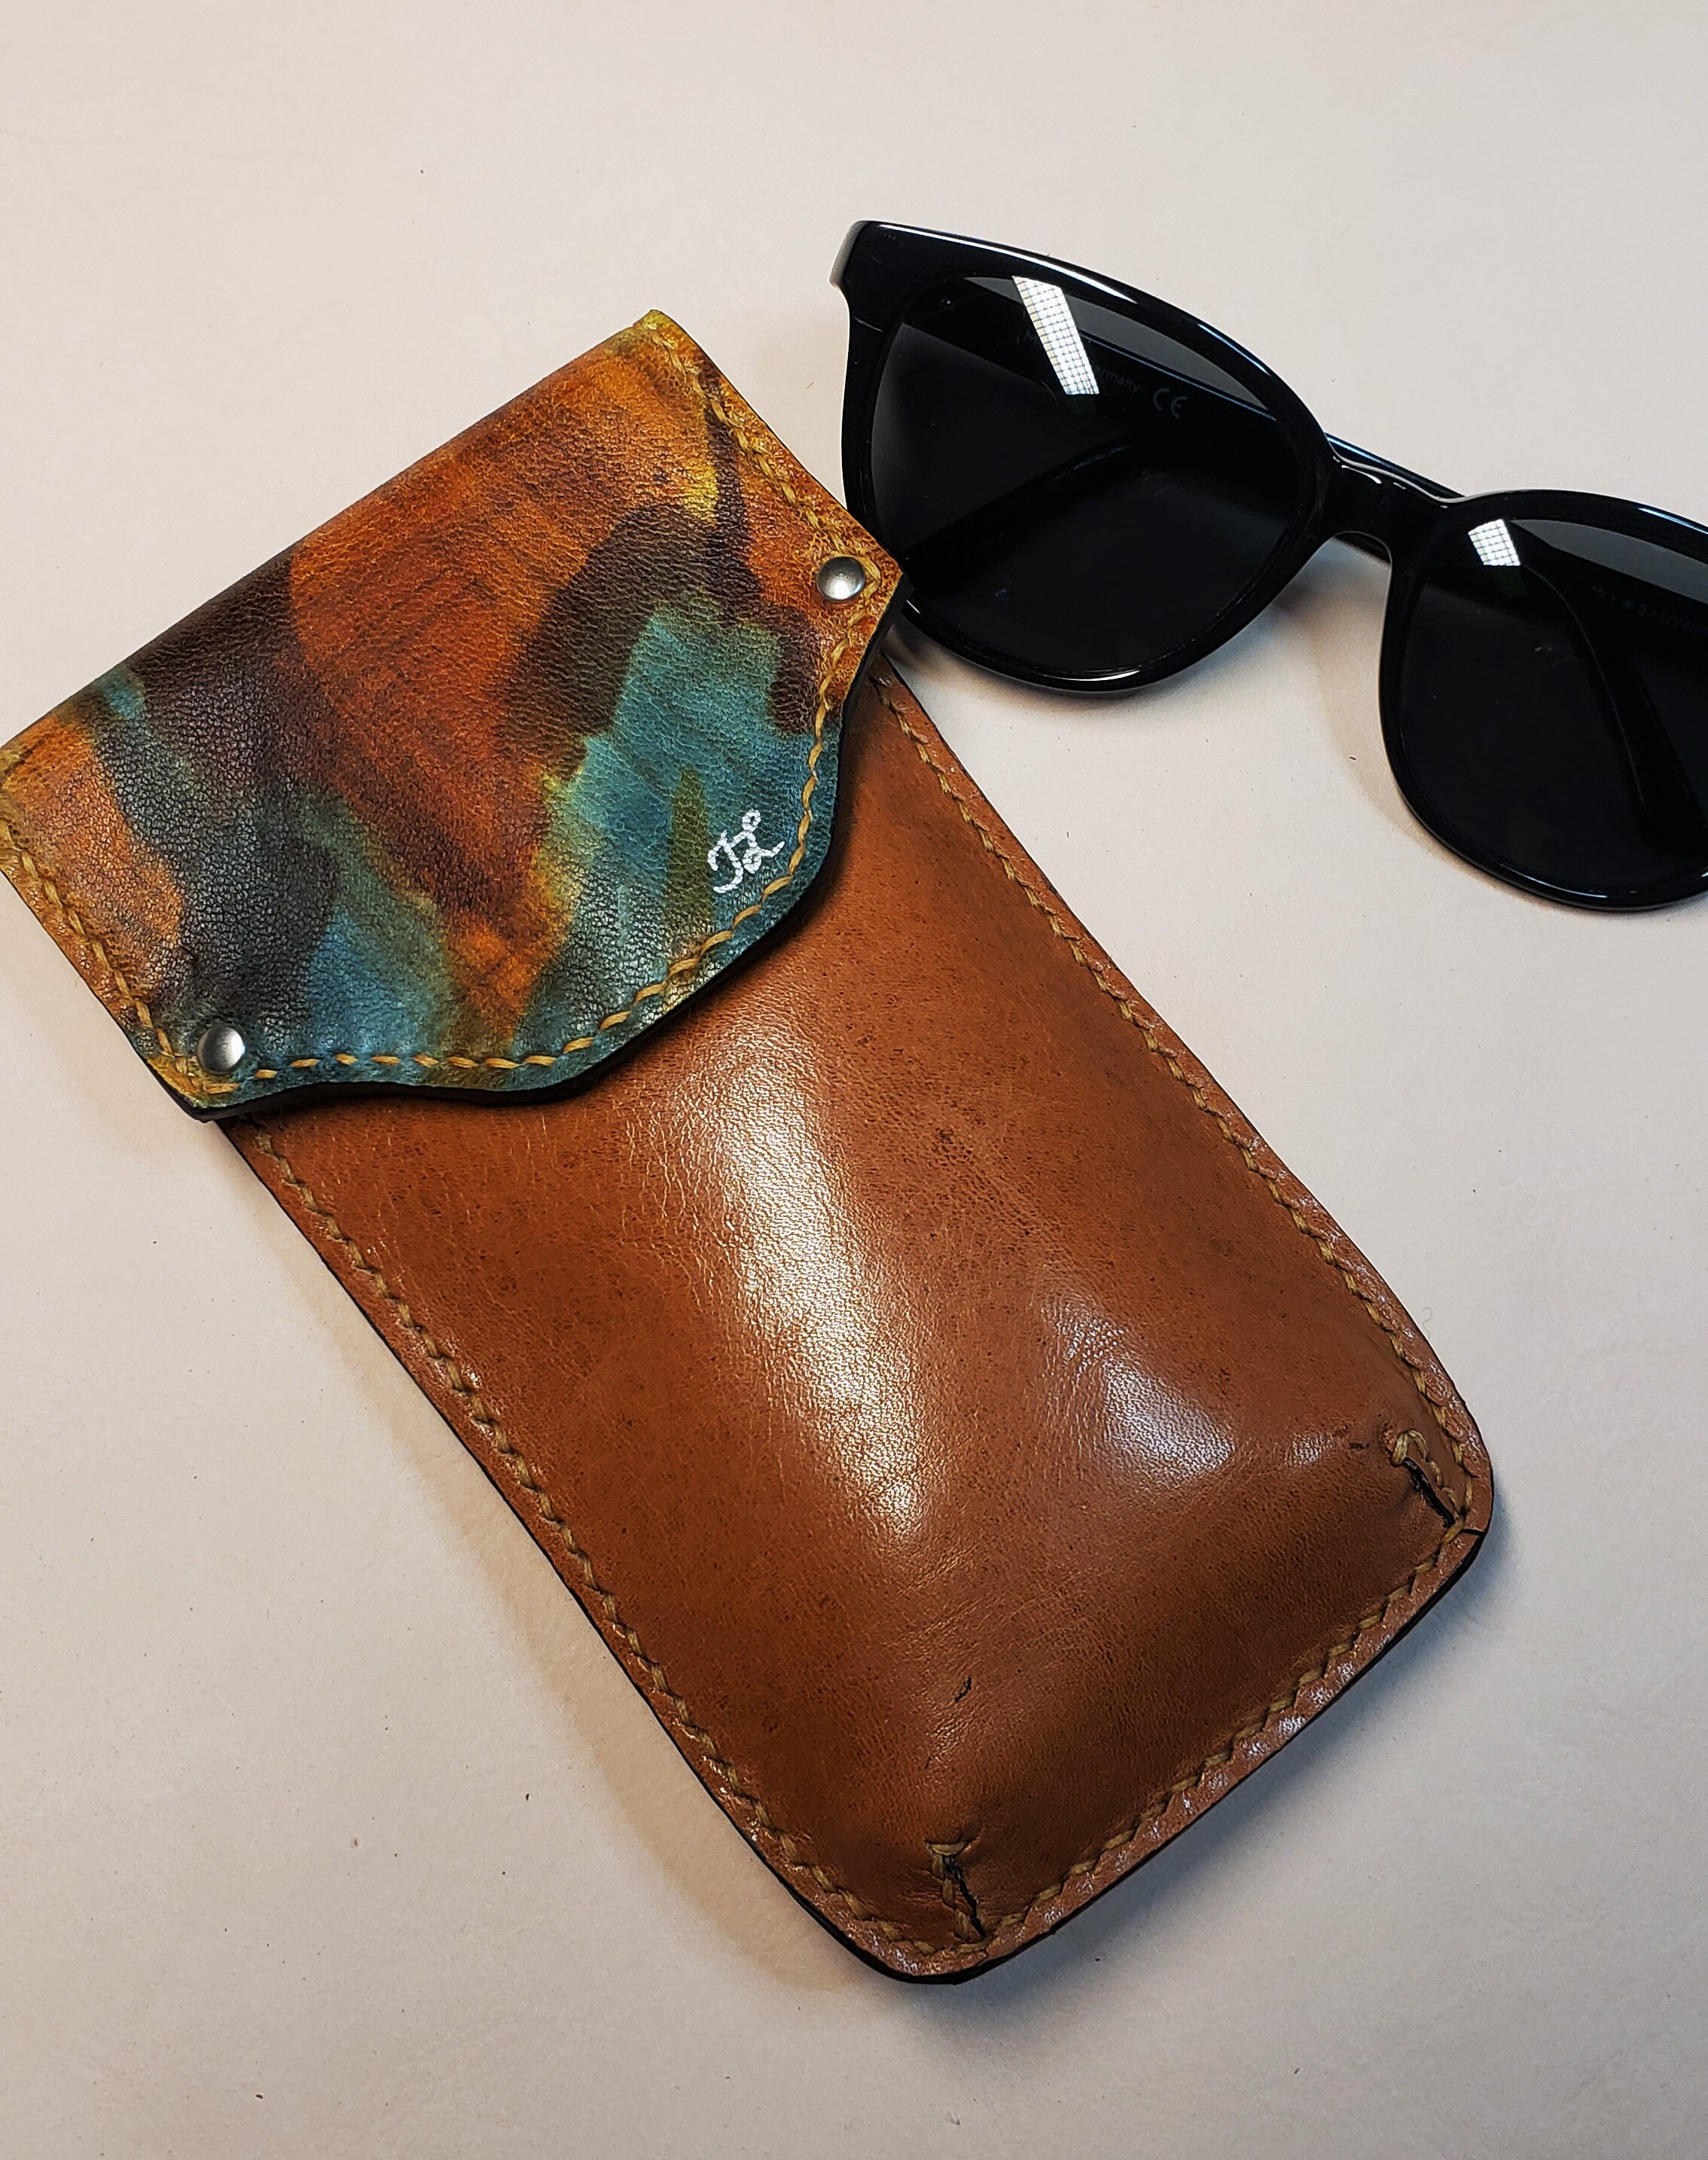 Hand Painted Recycled Leather Glasses Case in Navy and Gold 